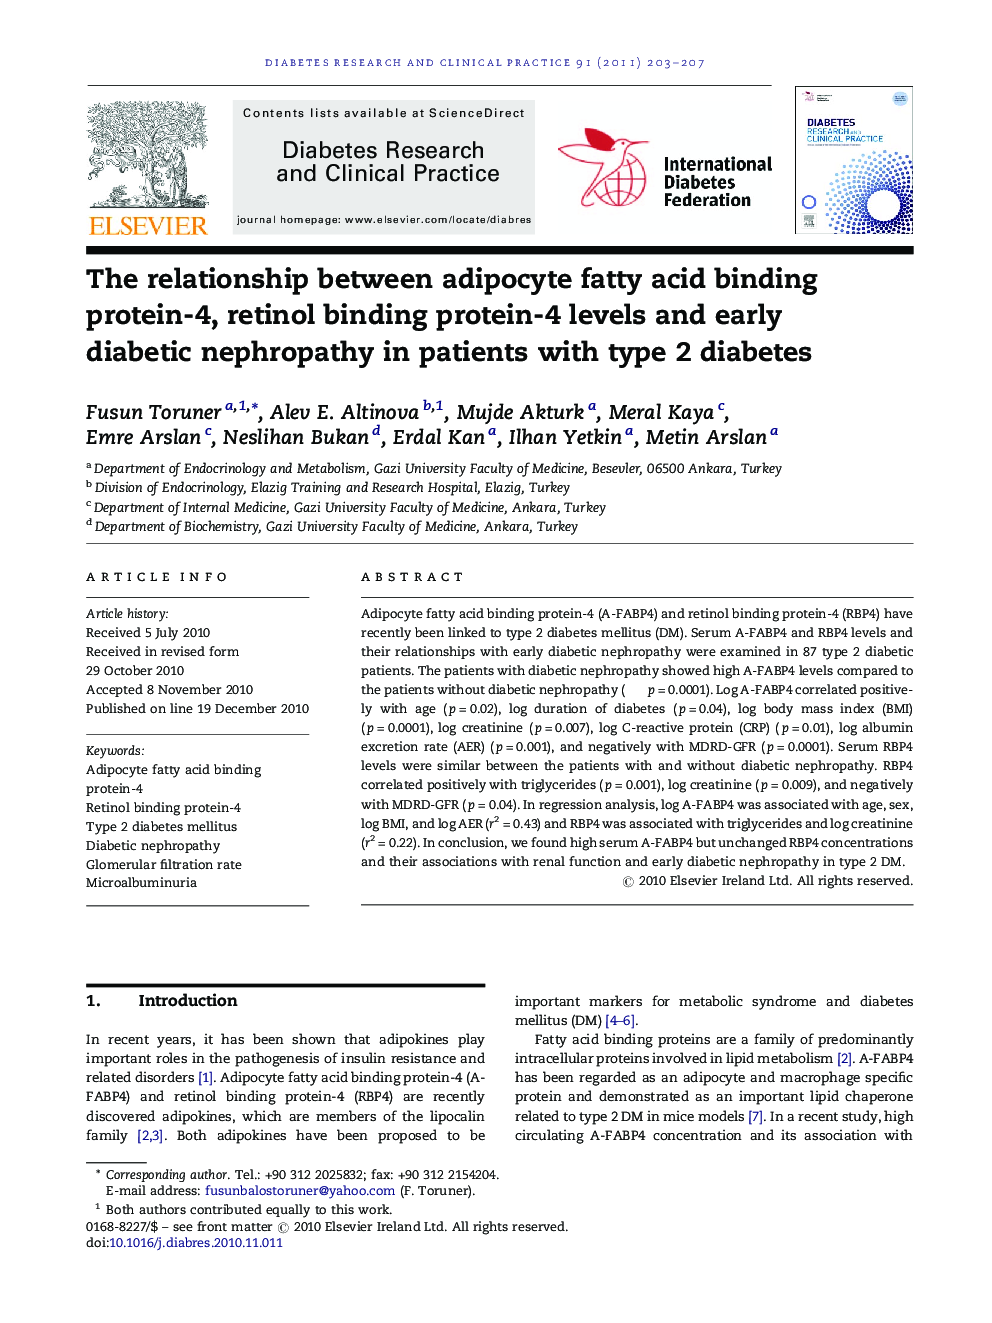 The relationship between adipocyte fatty acid binding protein-4, retinol binding protein-4 levels and early diabetic nephropathy in patients with type 2 diabetes